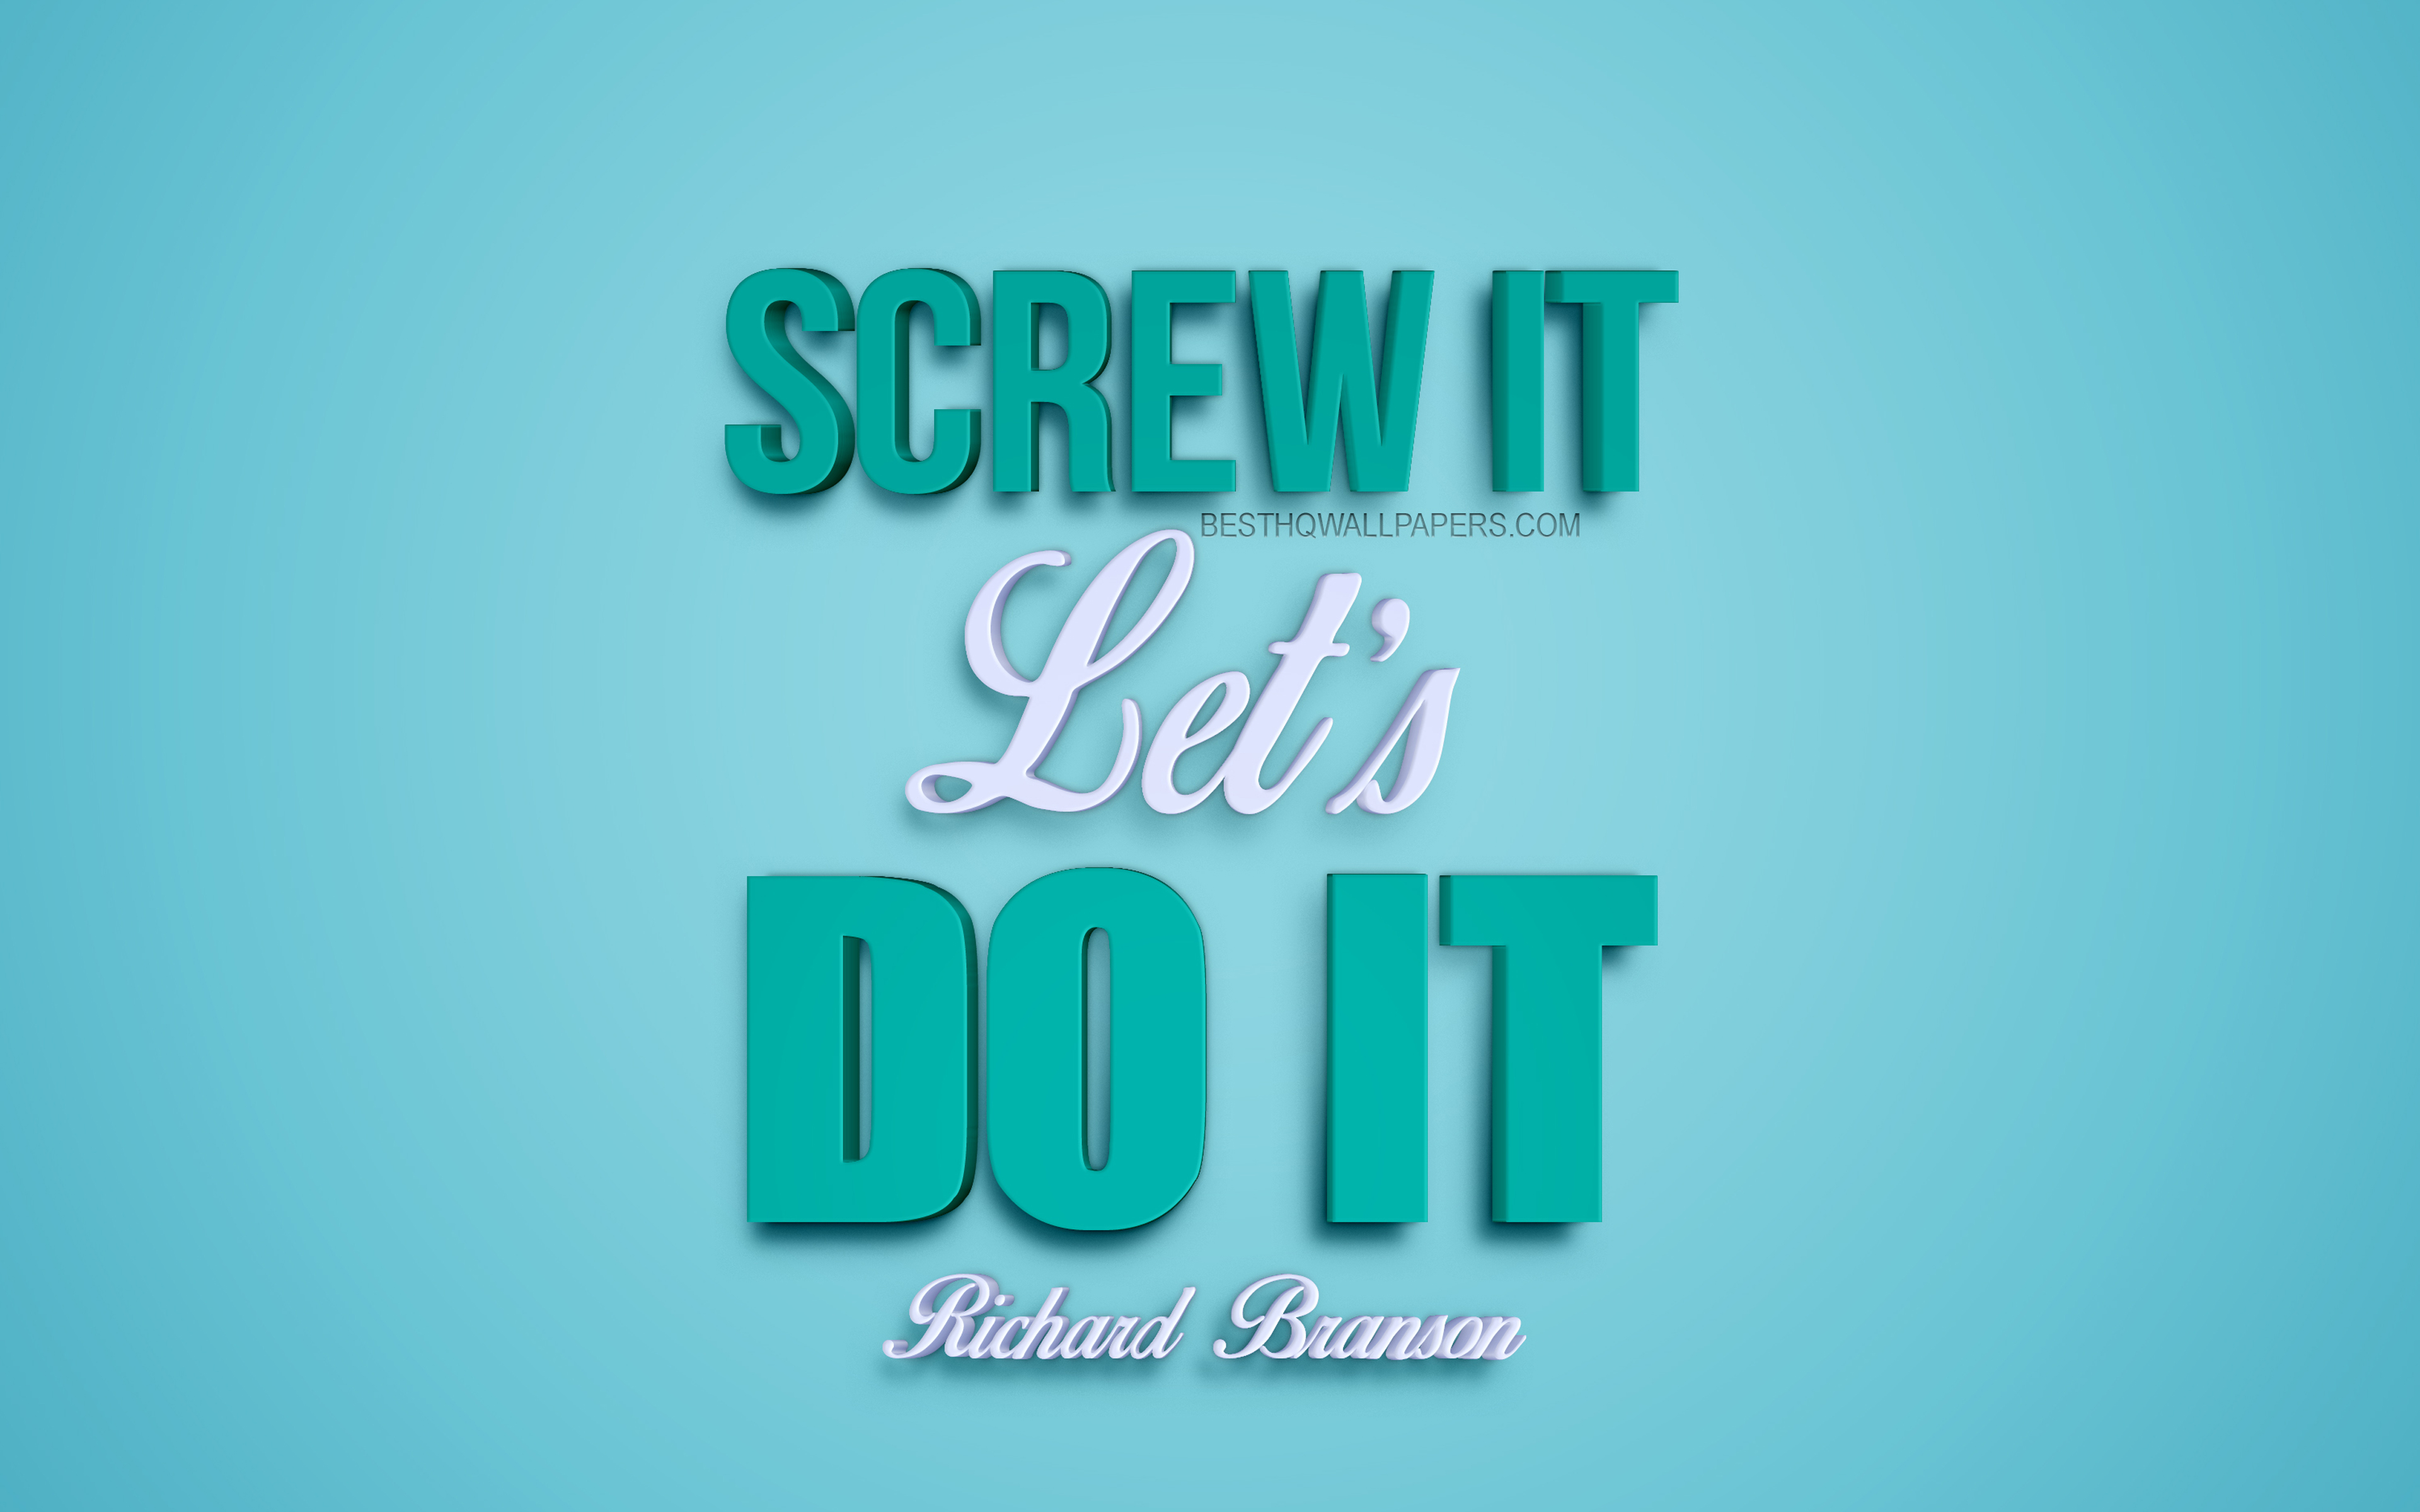 Download wallpaper Screw it Lets do it, Richard Branson Quotes, popular motivational quotes, creative 3D art, inspiration, blue background for desktop with resolution 3840x2400. High Quality HD picture wallpaper